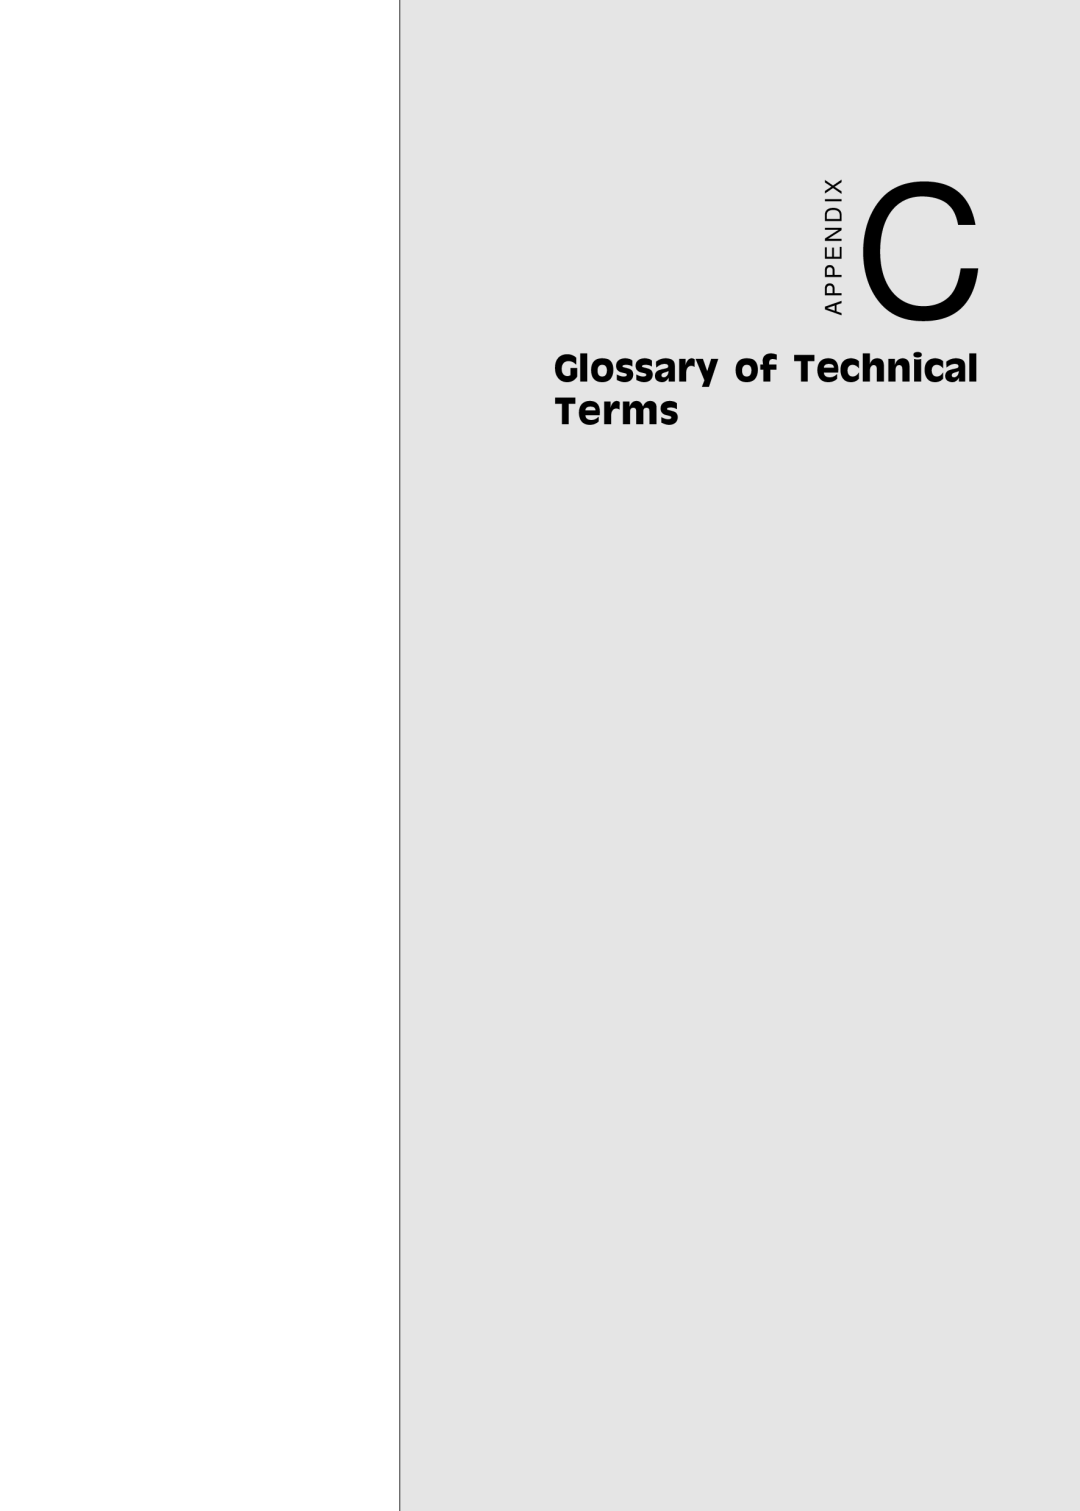 Adaptec PC/104, PCM-3420 manual Glossary of Technical Terms, Appendix C Glossary of Terms 